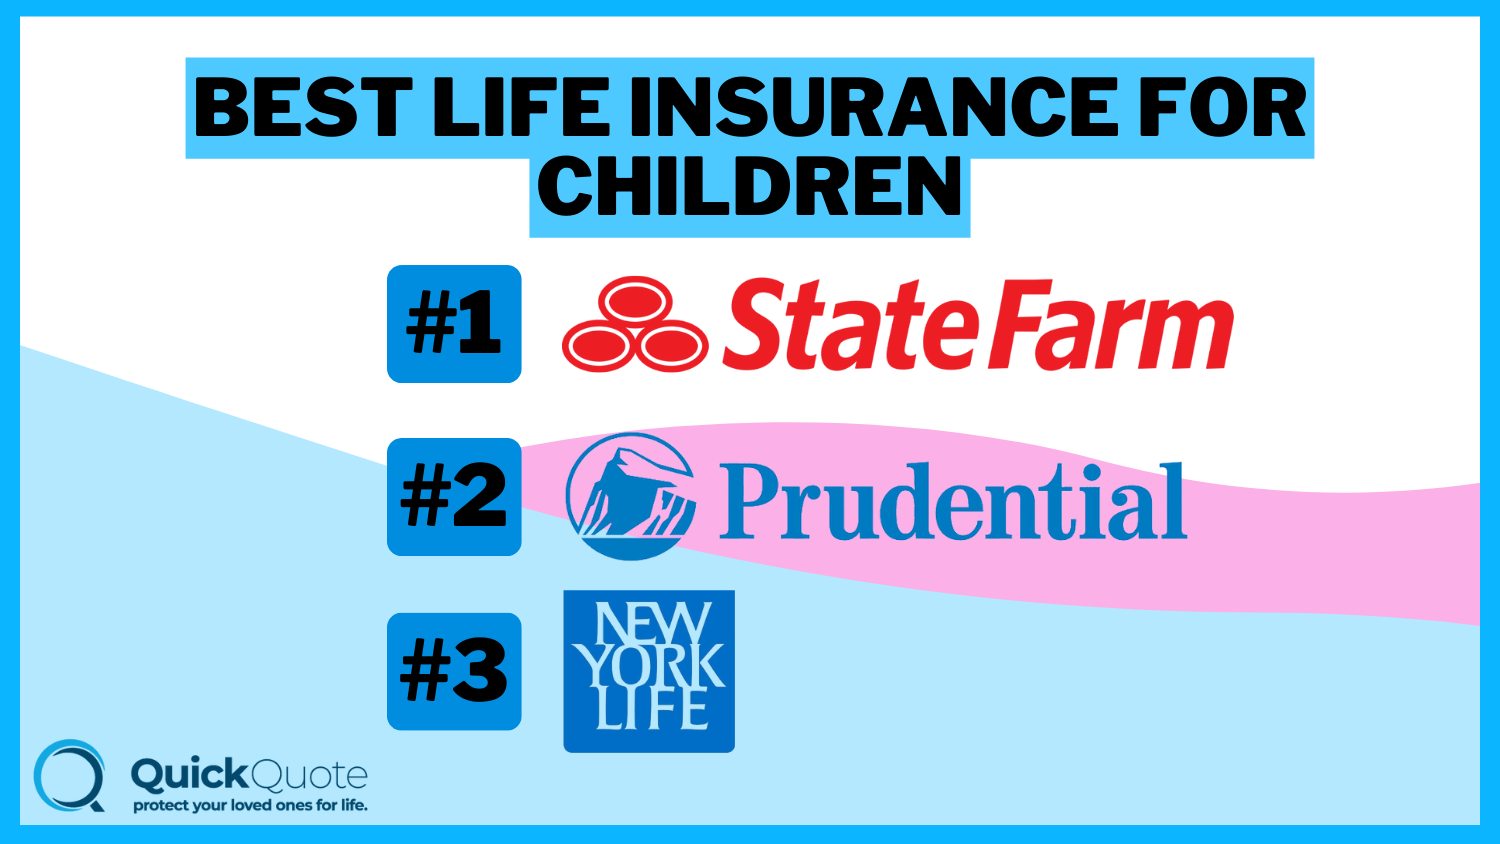 Best Life Insurance for Children: State Farm, Prudential, and New York Life